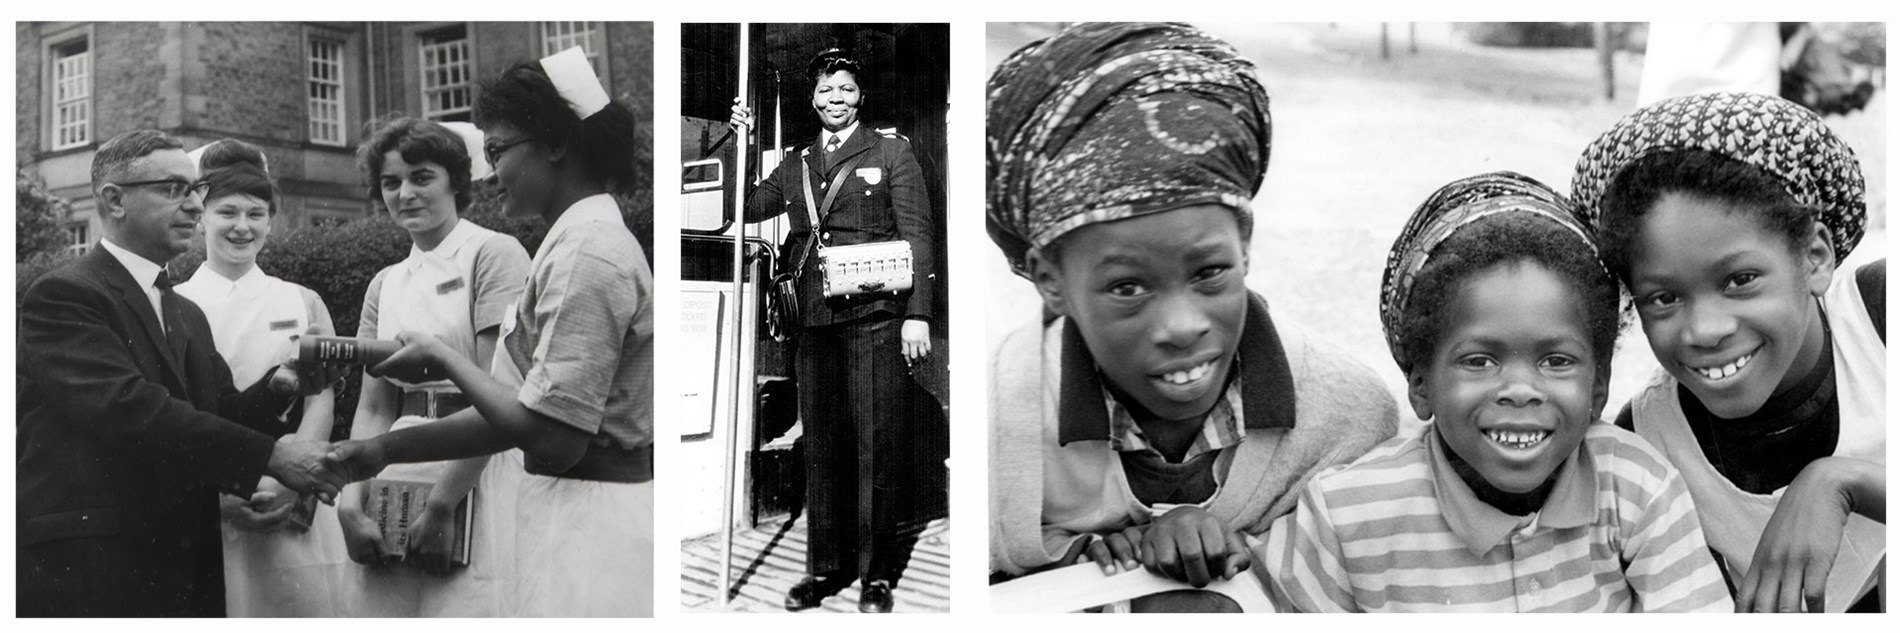 We see three black and white photographs, the first shows an African Caribbean nurse receiving an award in the 1960s, the second shows an African Caribbean bus conductor posing for a photo on a bus in the 1970s, the third shows three African Caribbean children who are all smiling at a camera in the 1970s.